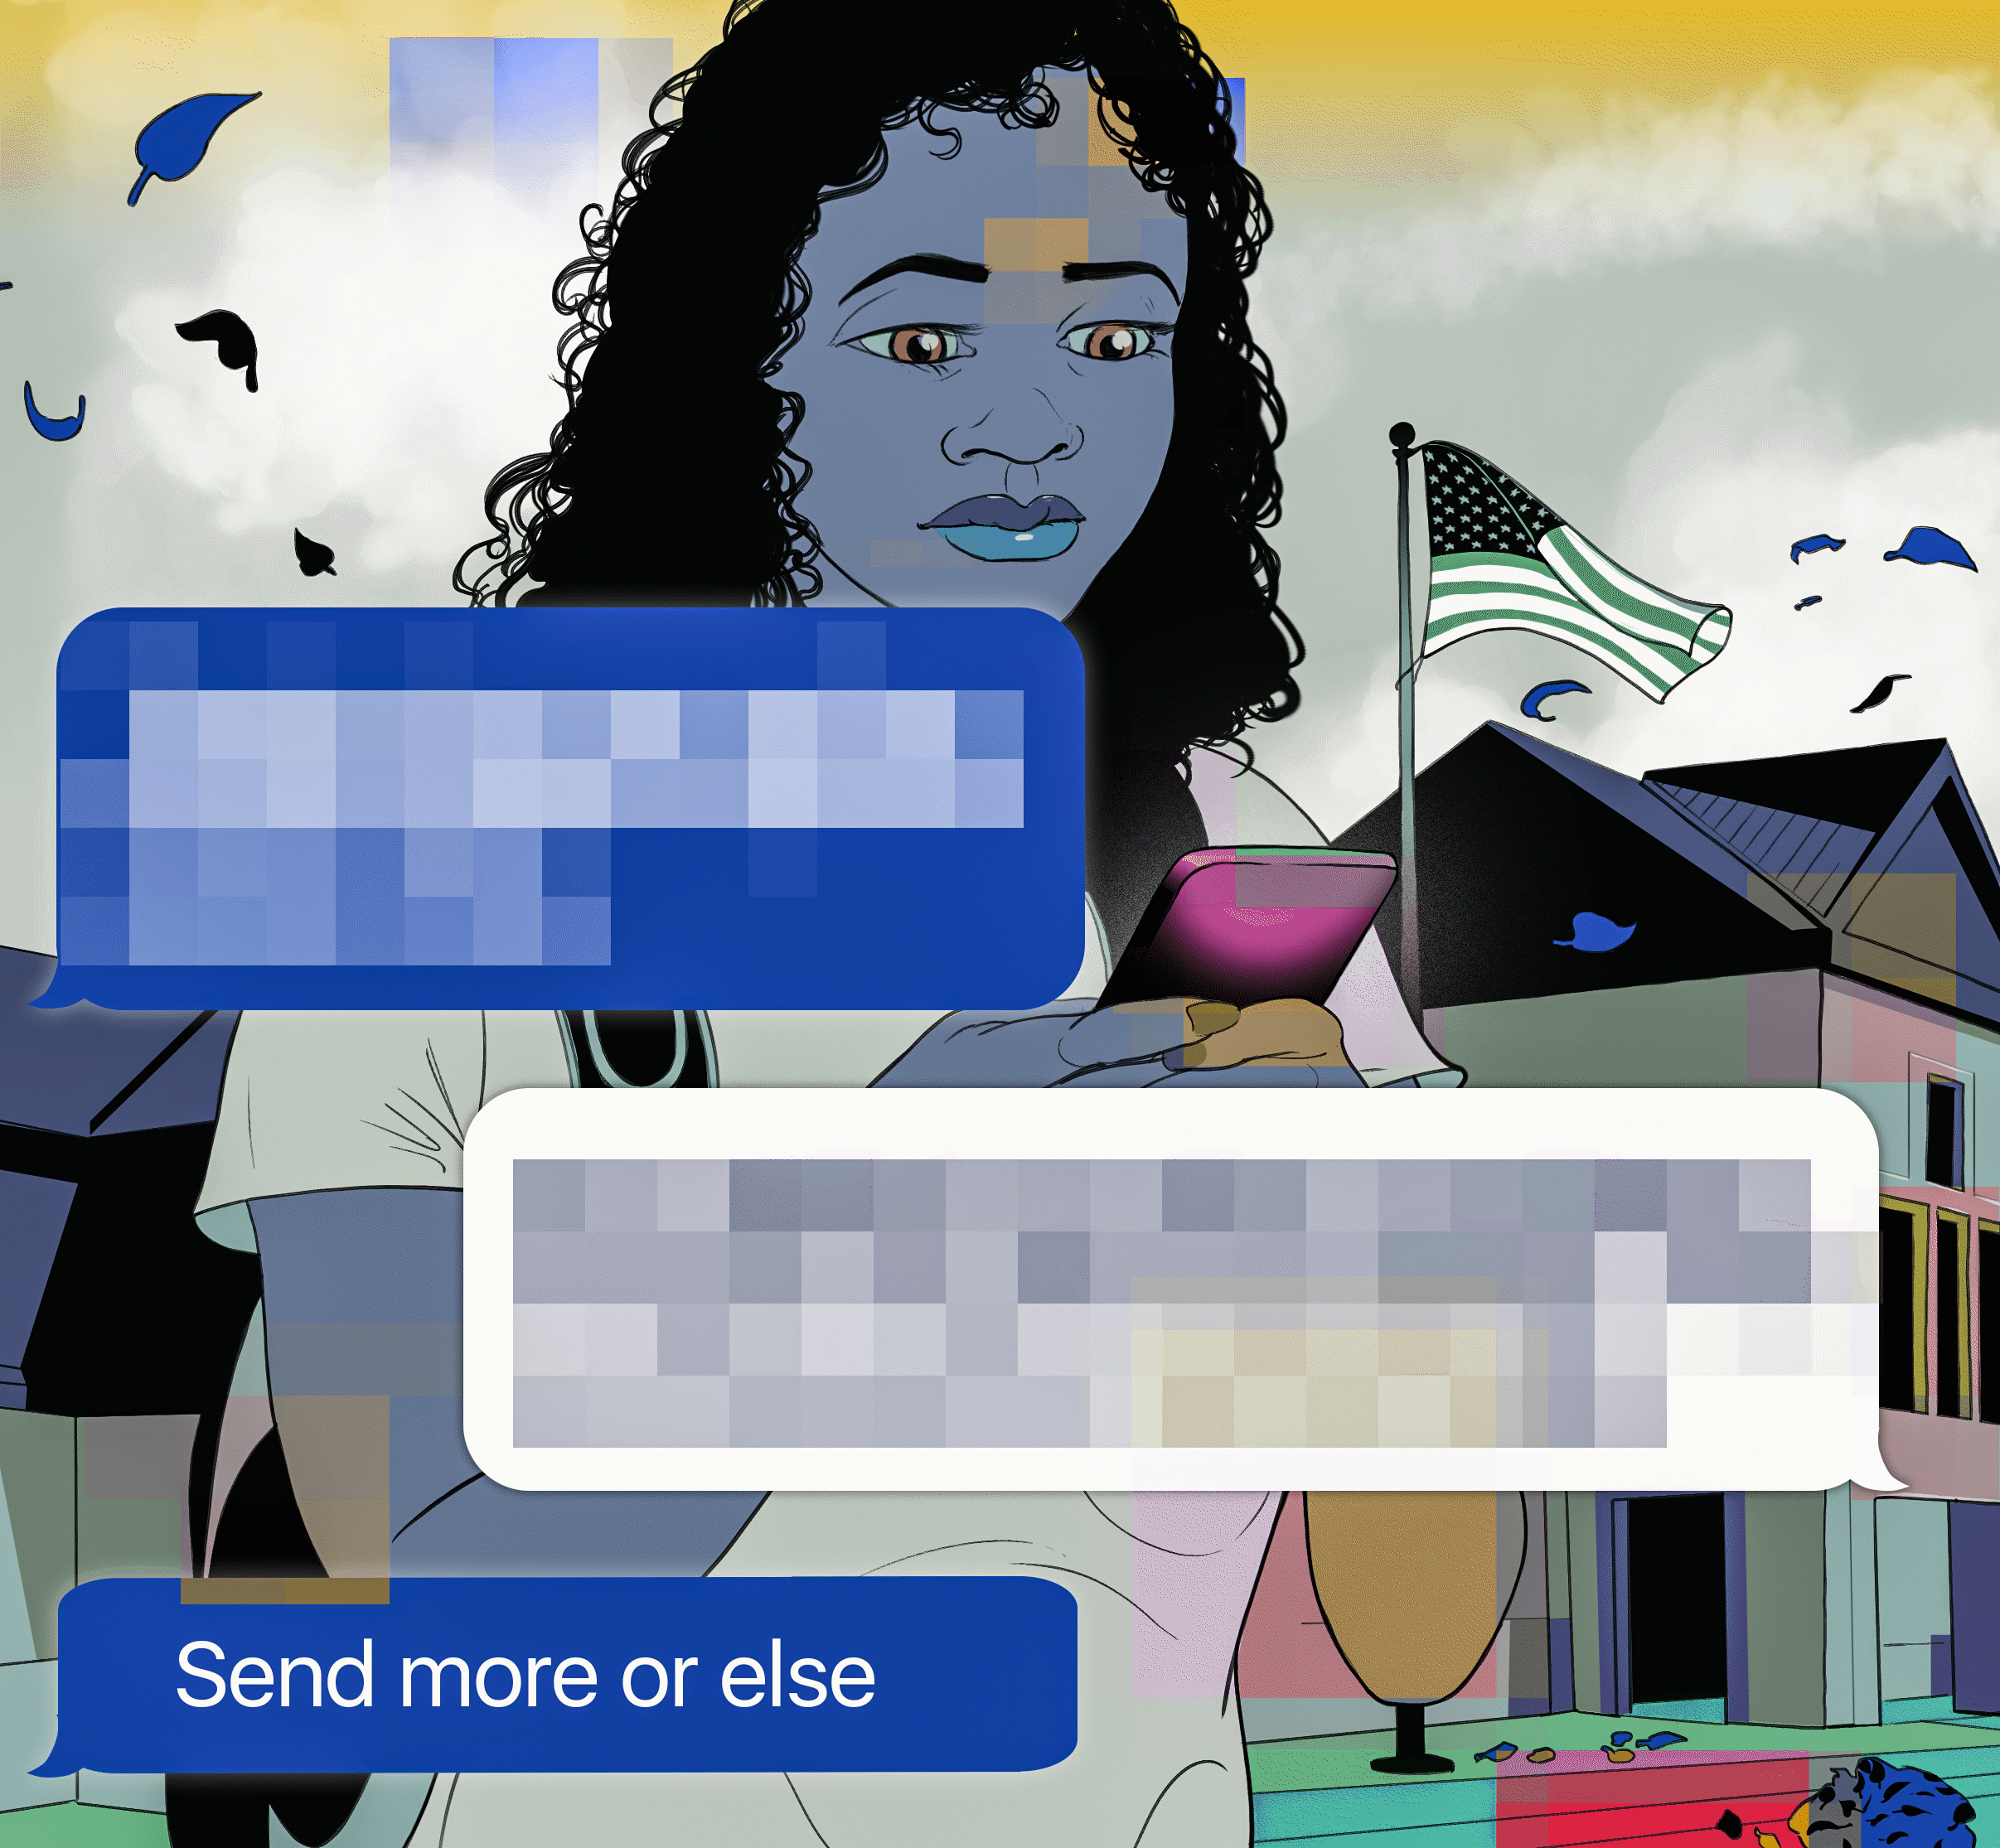 Illustration of girl walking while sending text messages, the words blurred by pixels.